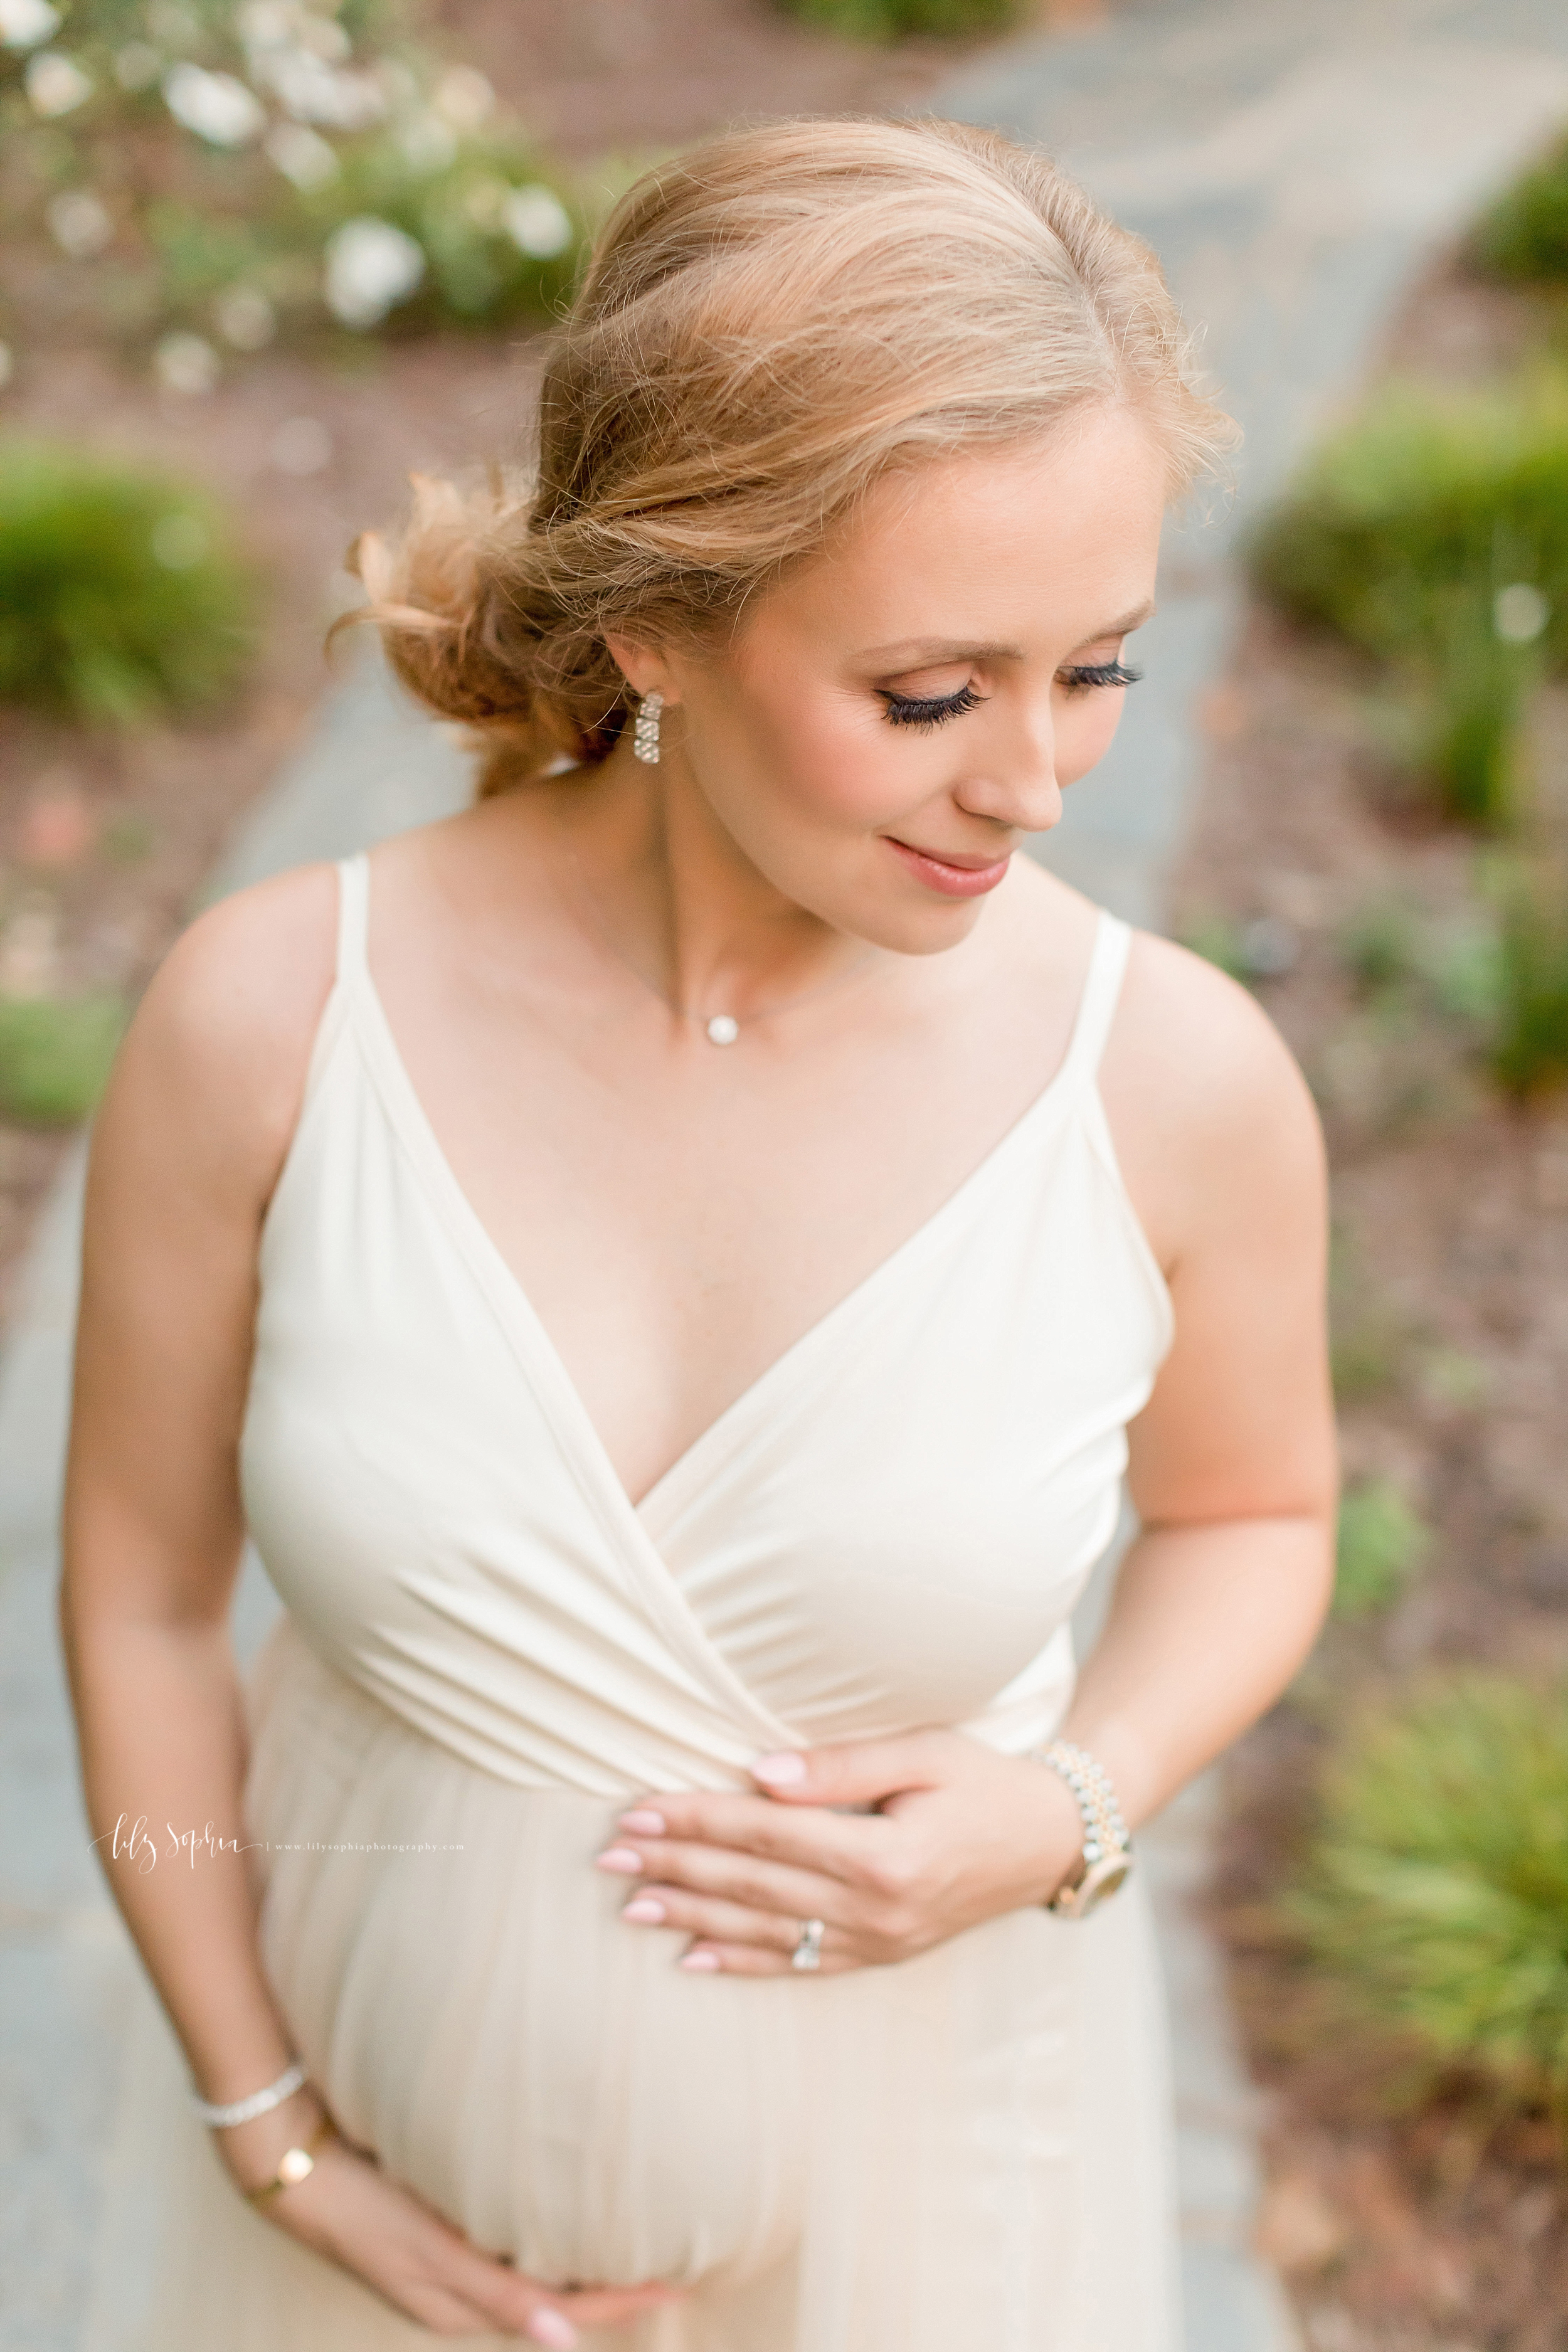 atlanta-buckhead-brookhaven-inman-decatur-lily-sophia-photography-maternity-pregnancy-photographer-portraits-studio-grant-park-intown-couple-russian-expecting-baby-boy-outdoors-gardens-sunset-fall_0674.jpg